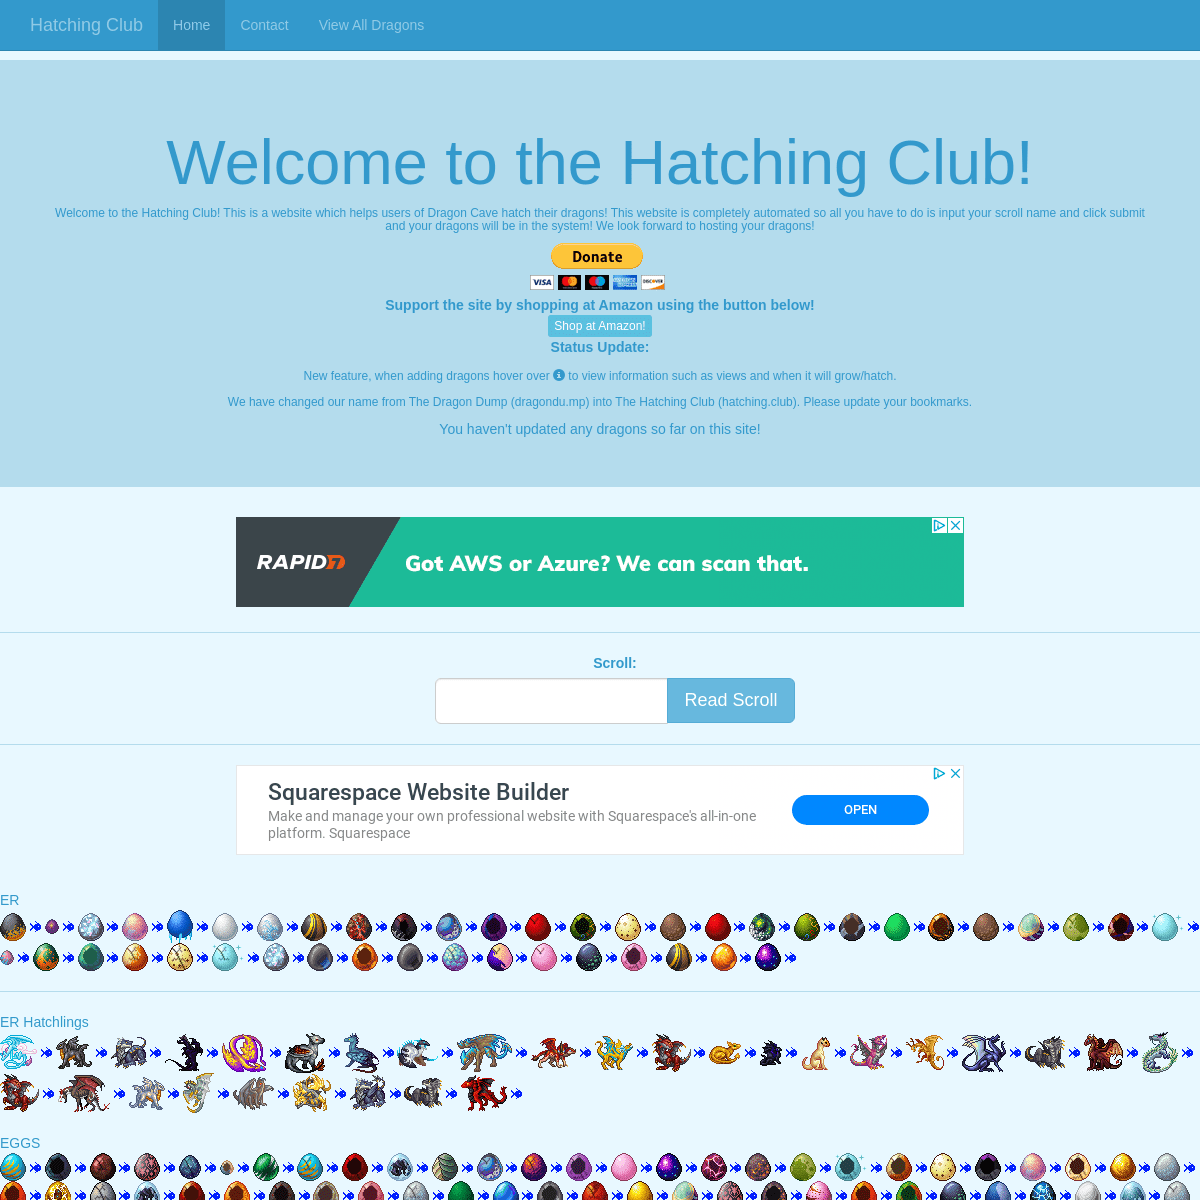 A complete backup of hatching.club